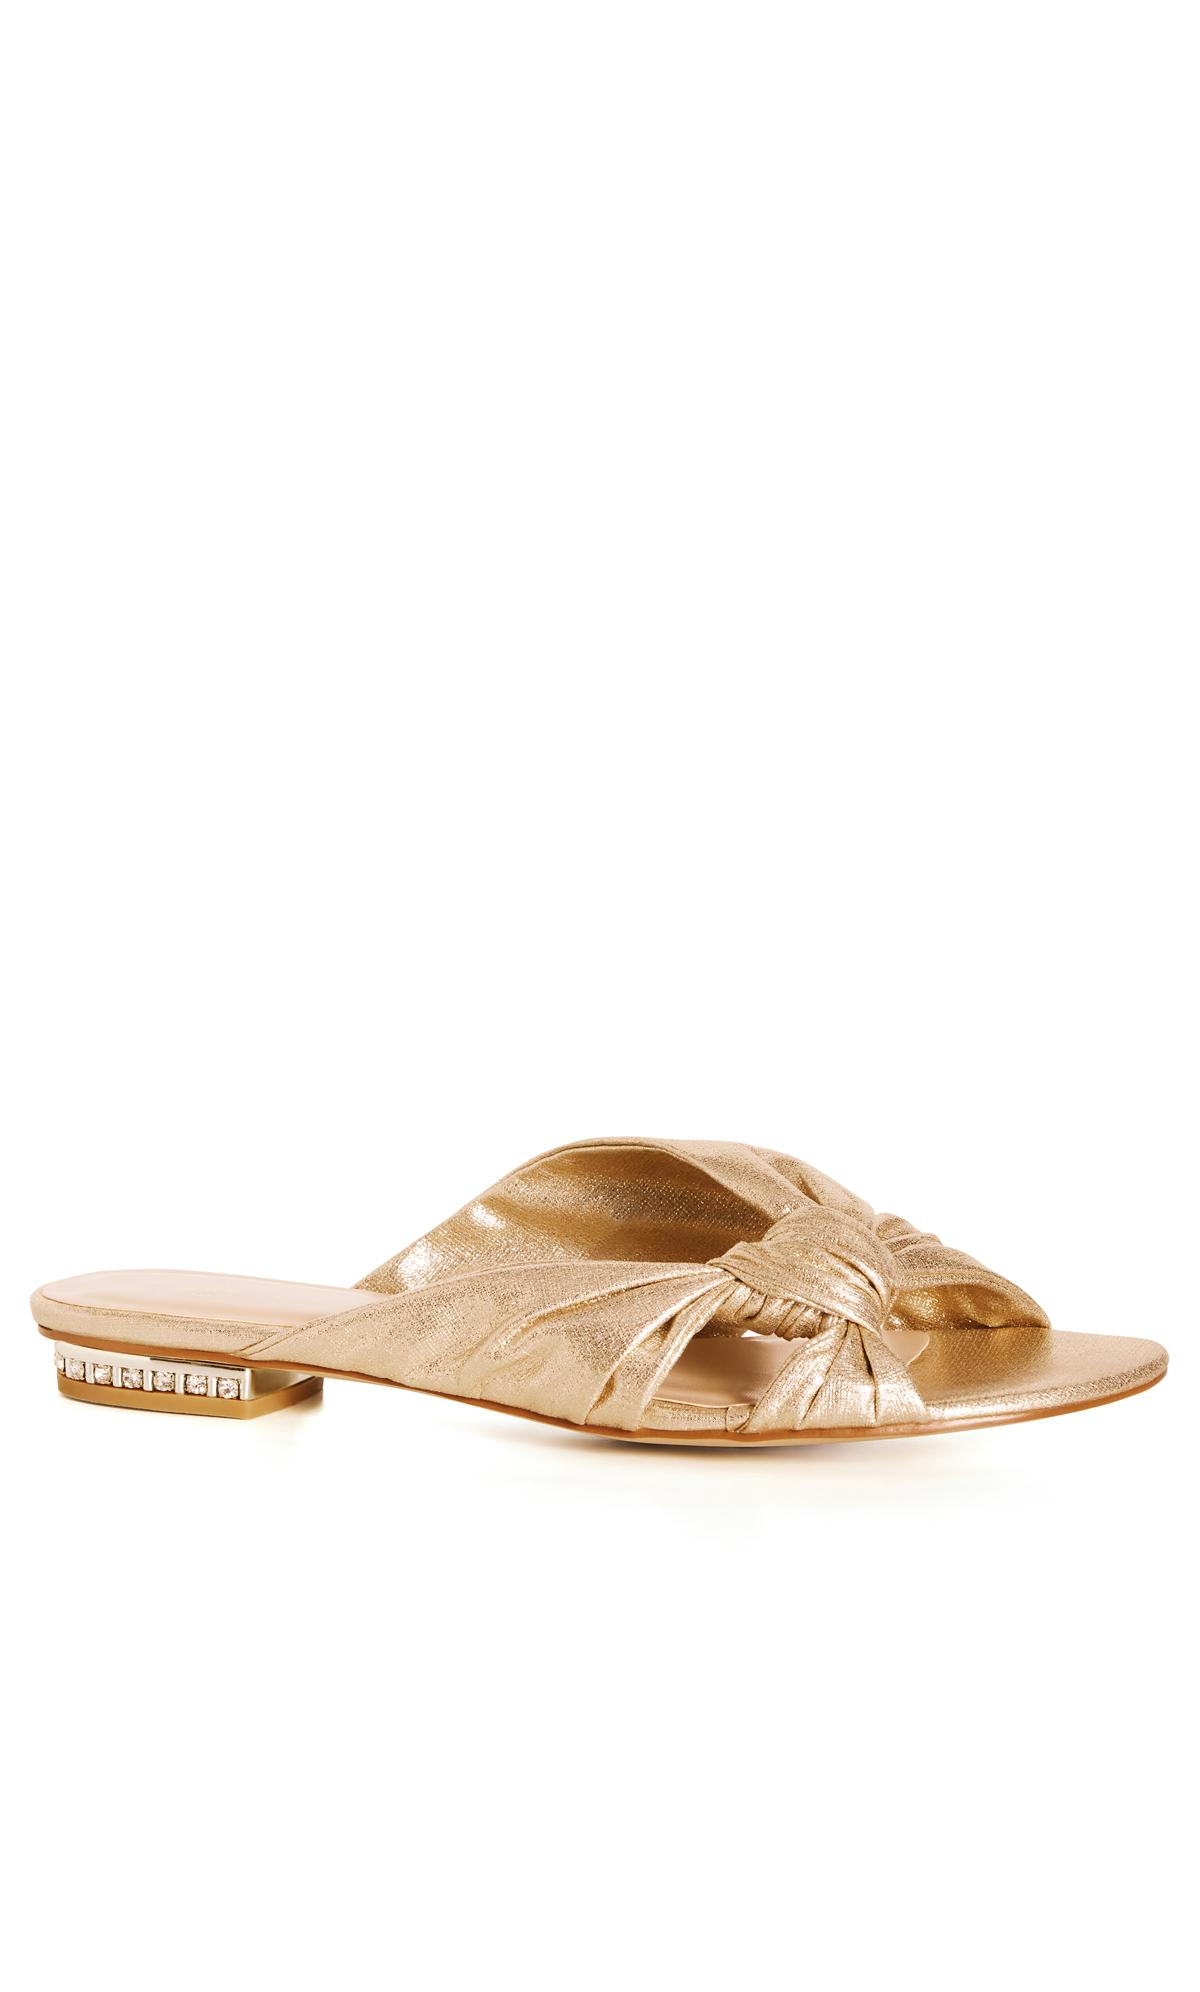 Evans Gold Knotted Sandals 2